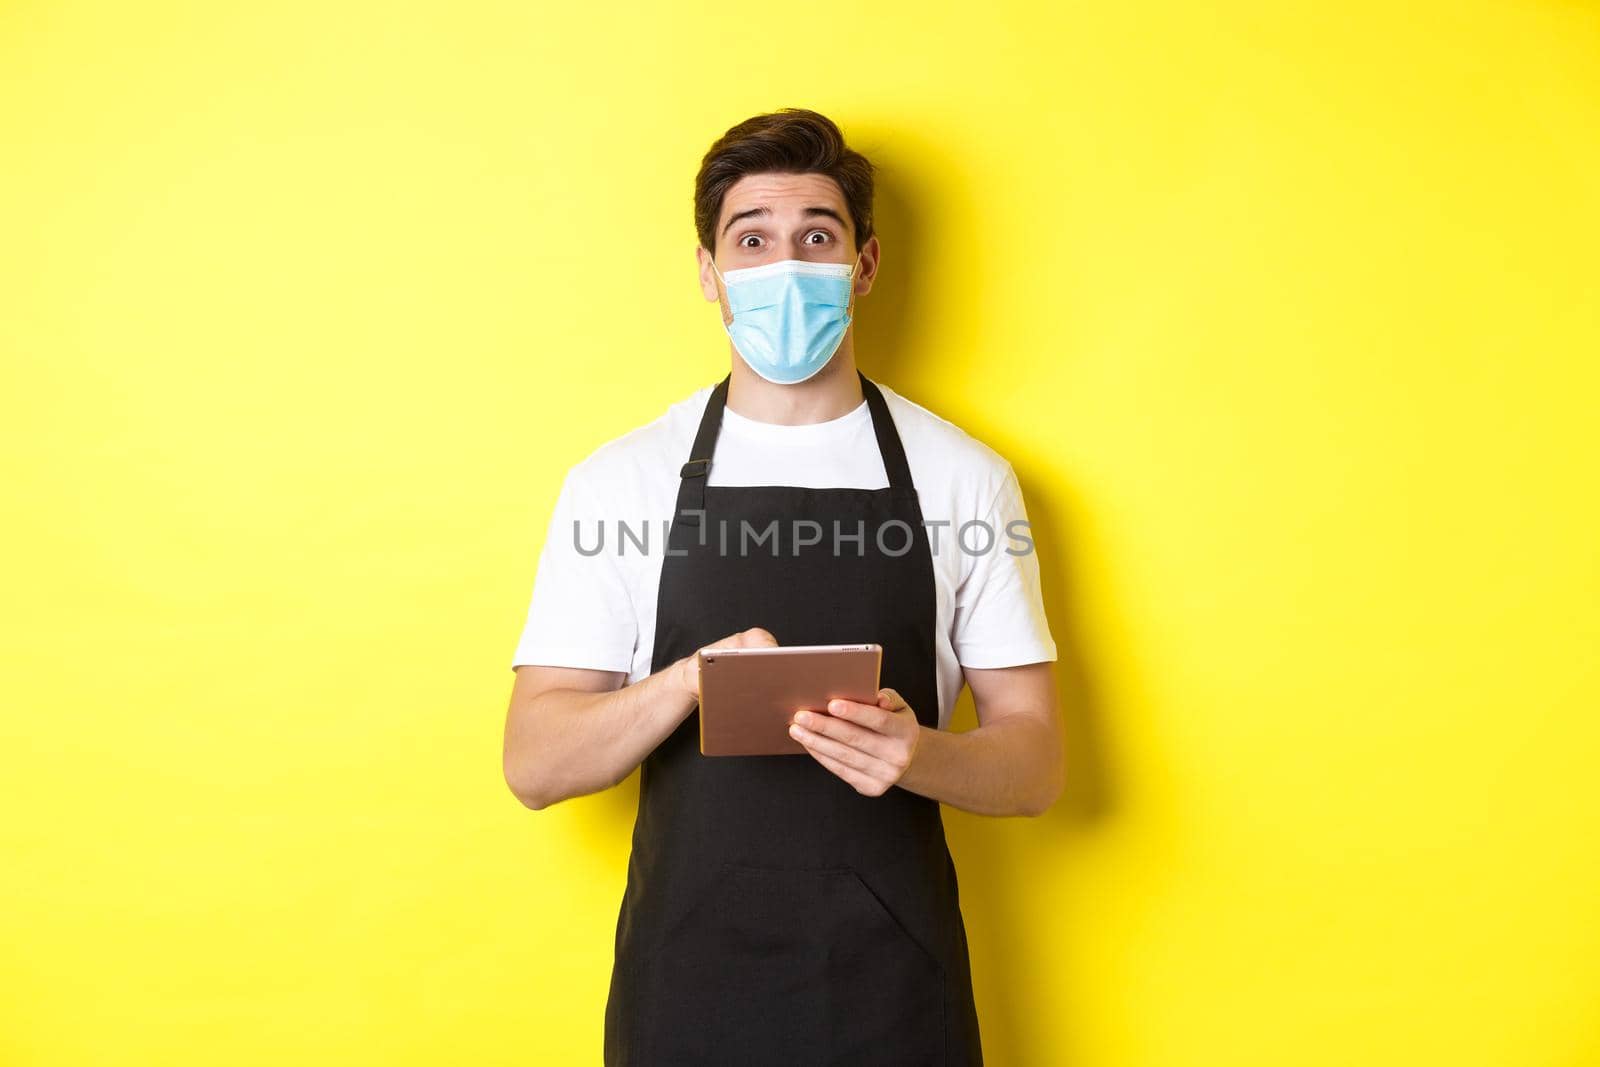 Concept of covid-19, small business and pandemic. Waiter in black apron and medical mask taking order, holding digital tablet, standing over yellow background.